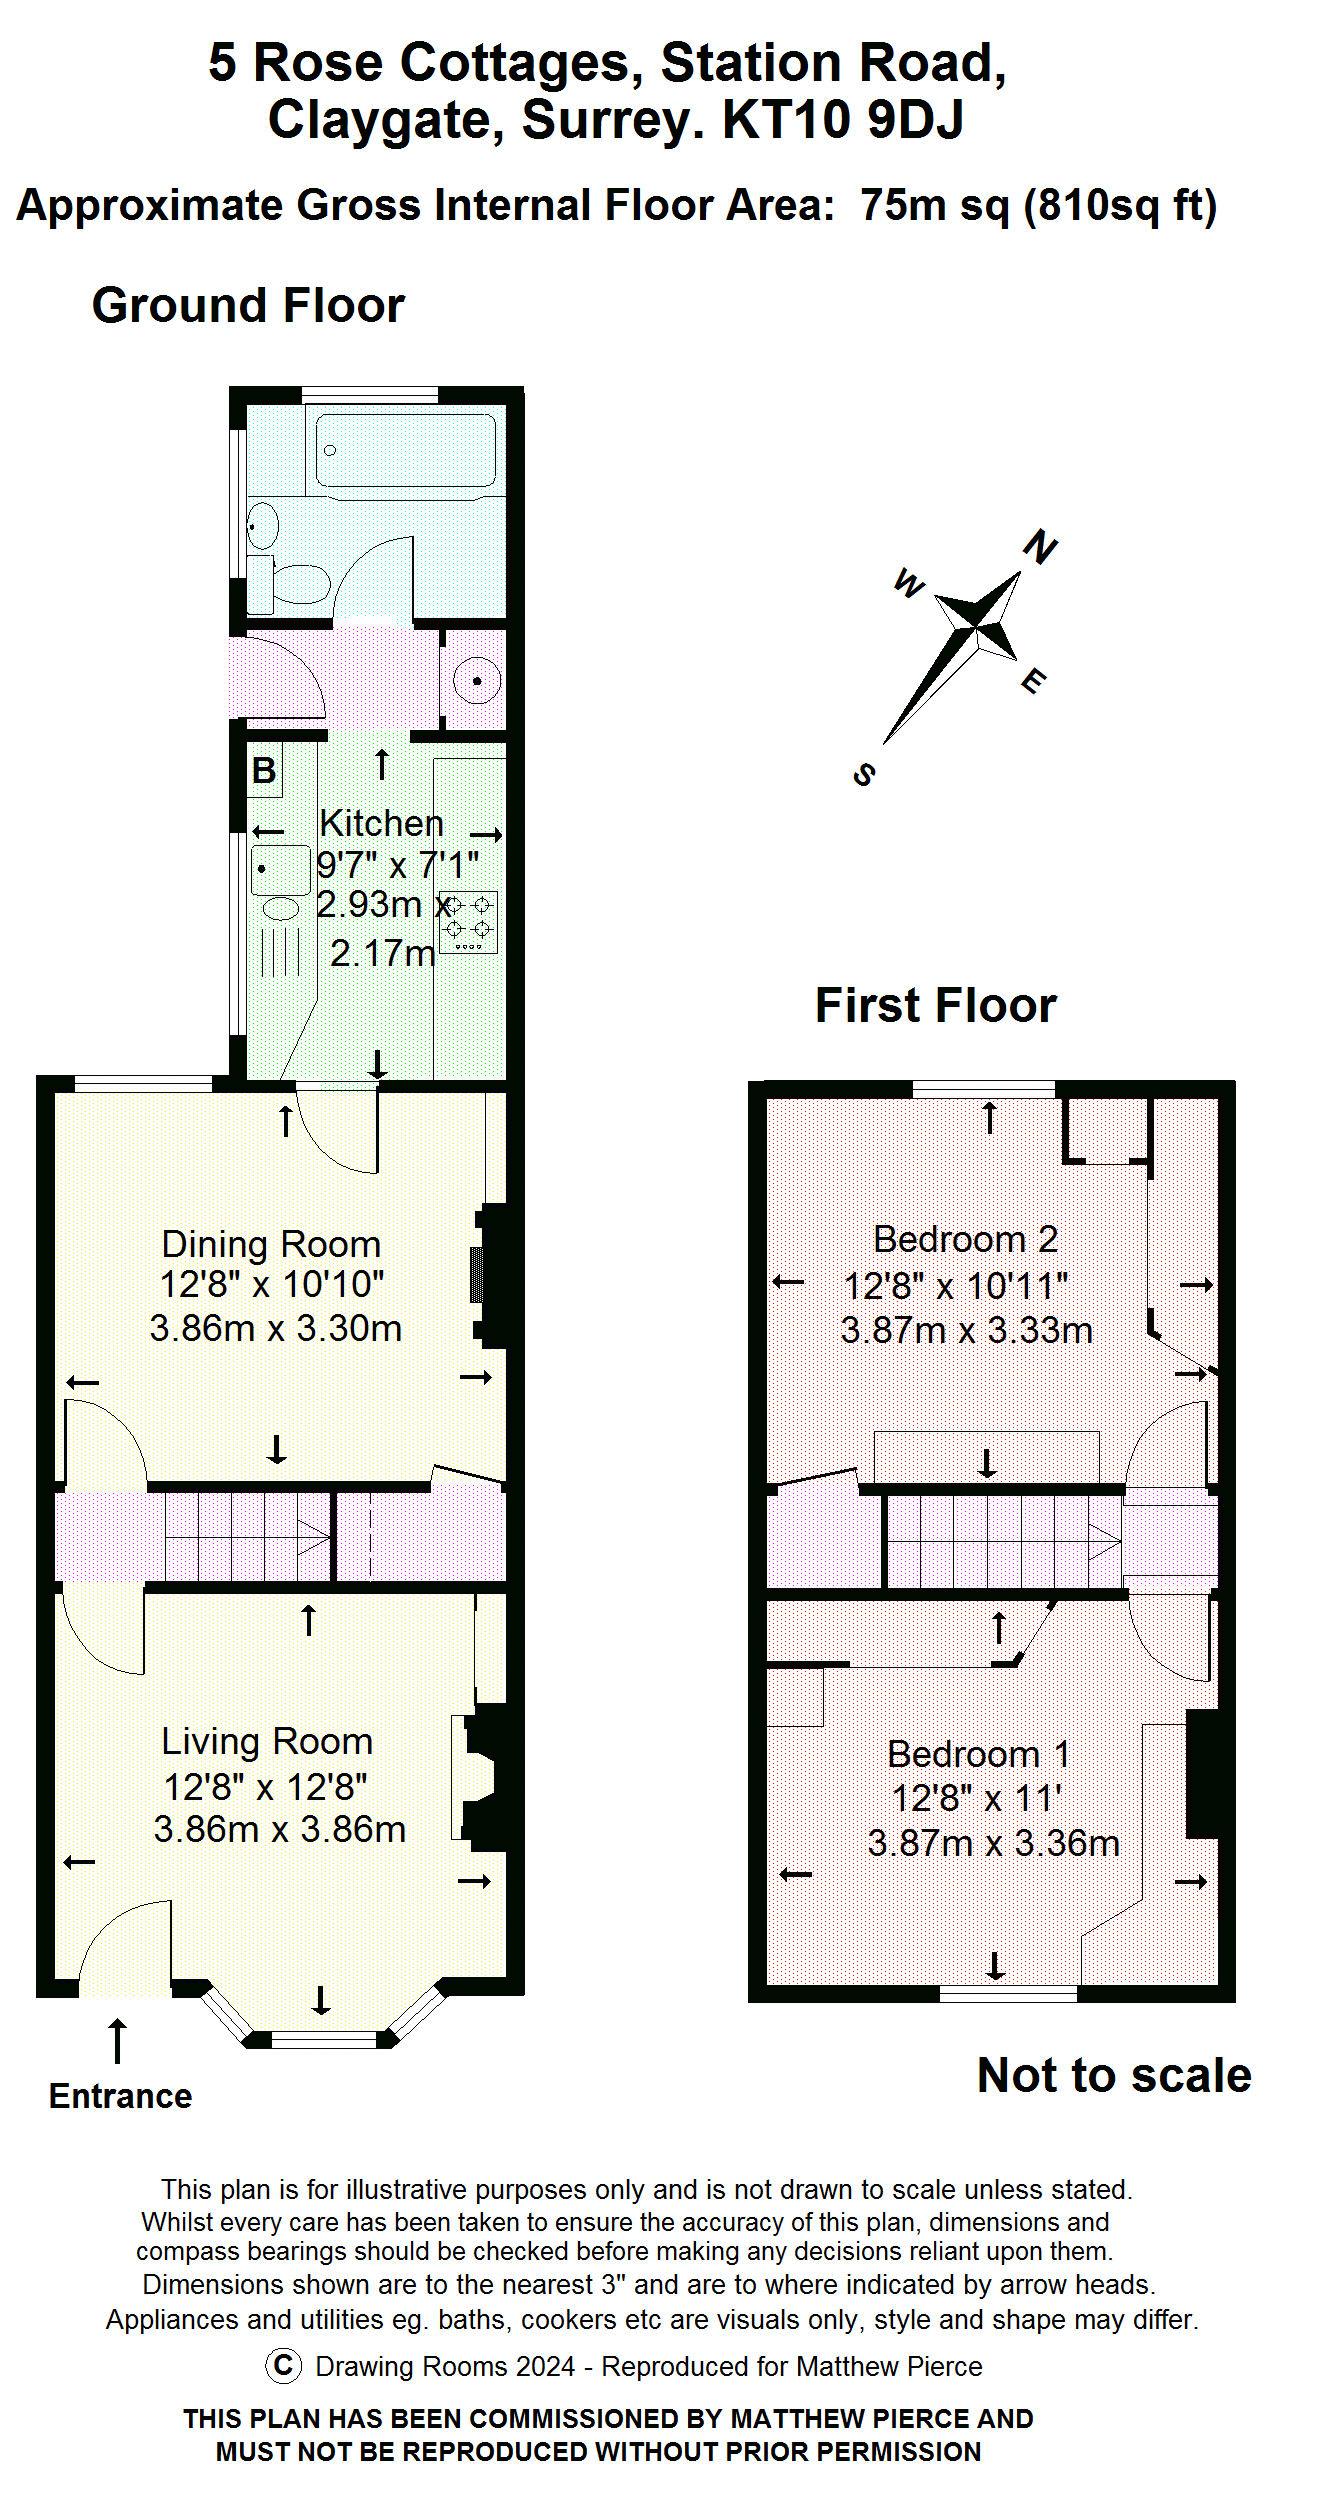 Floorplans For Station Road, Claygate